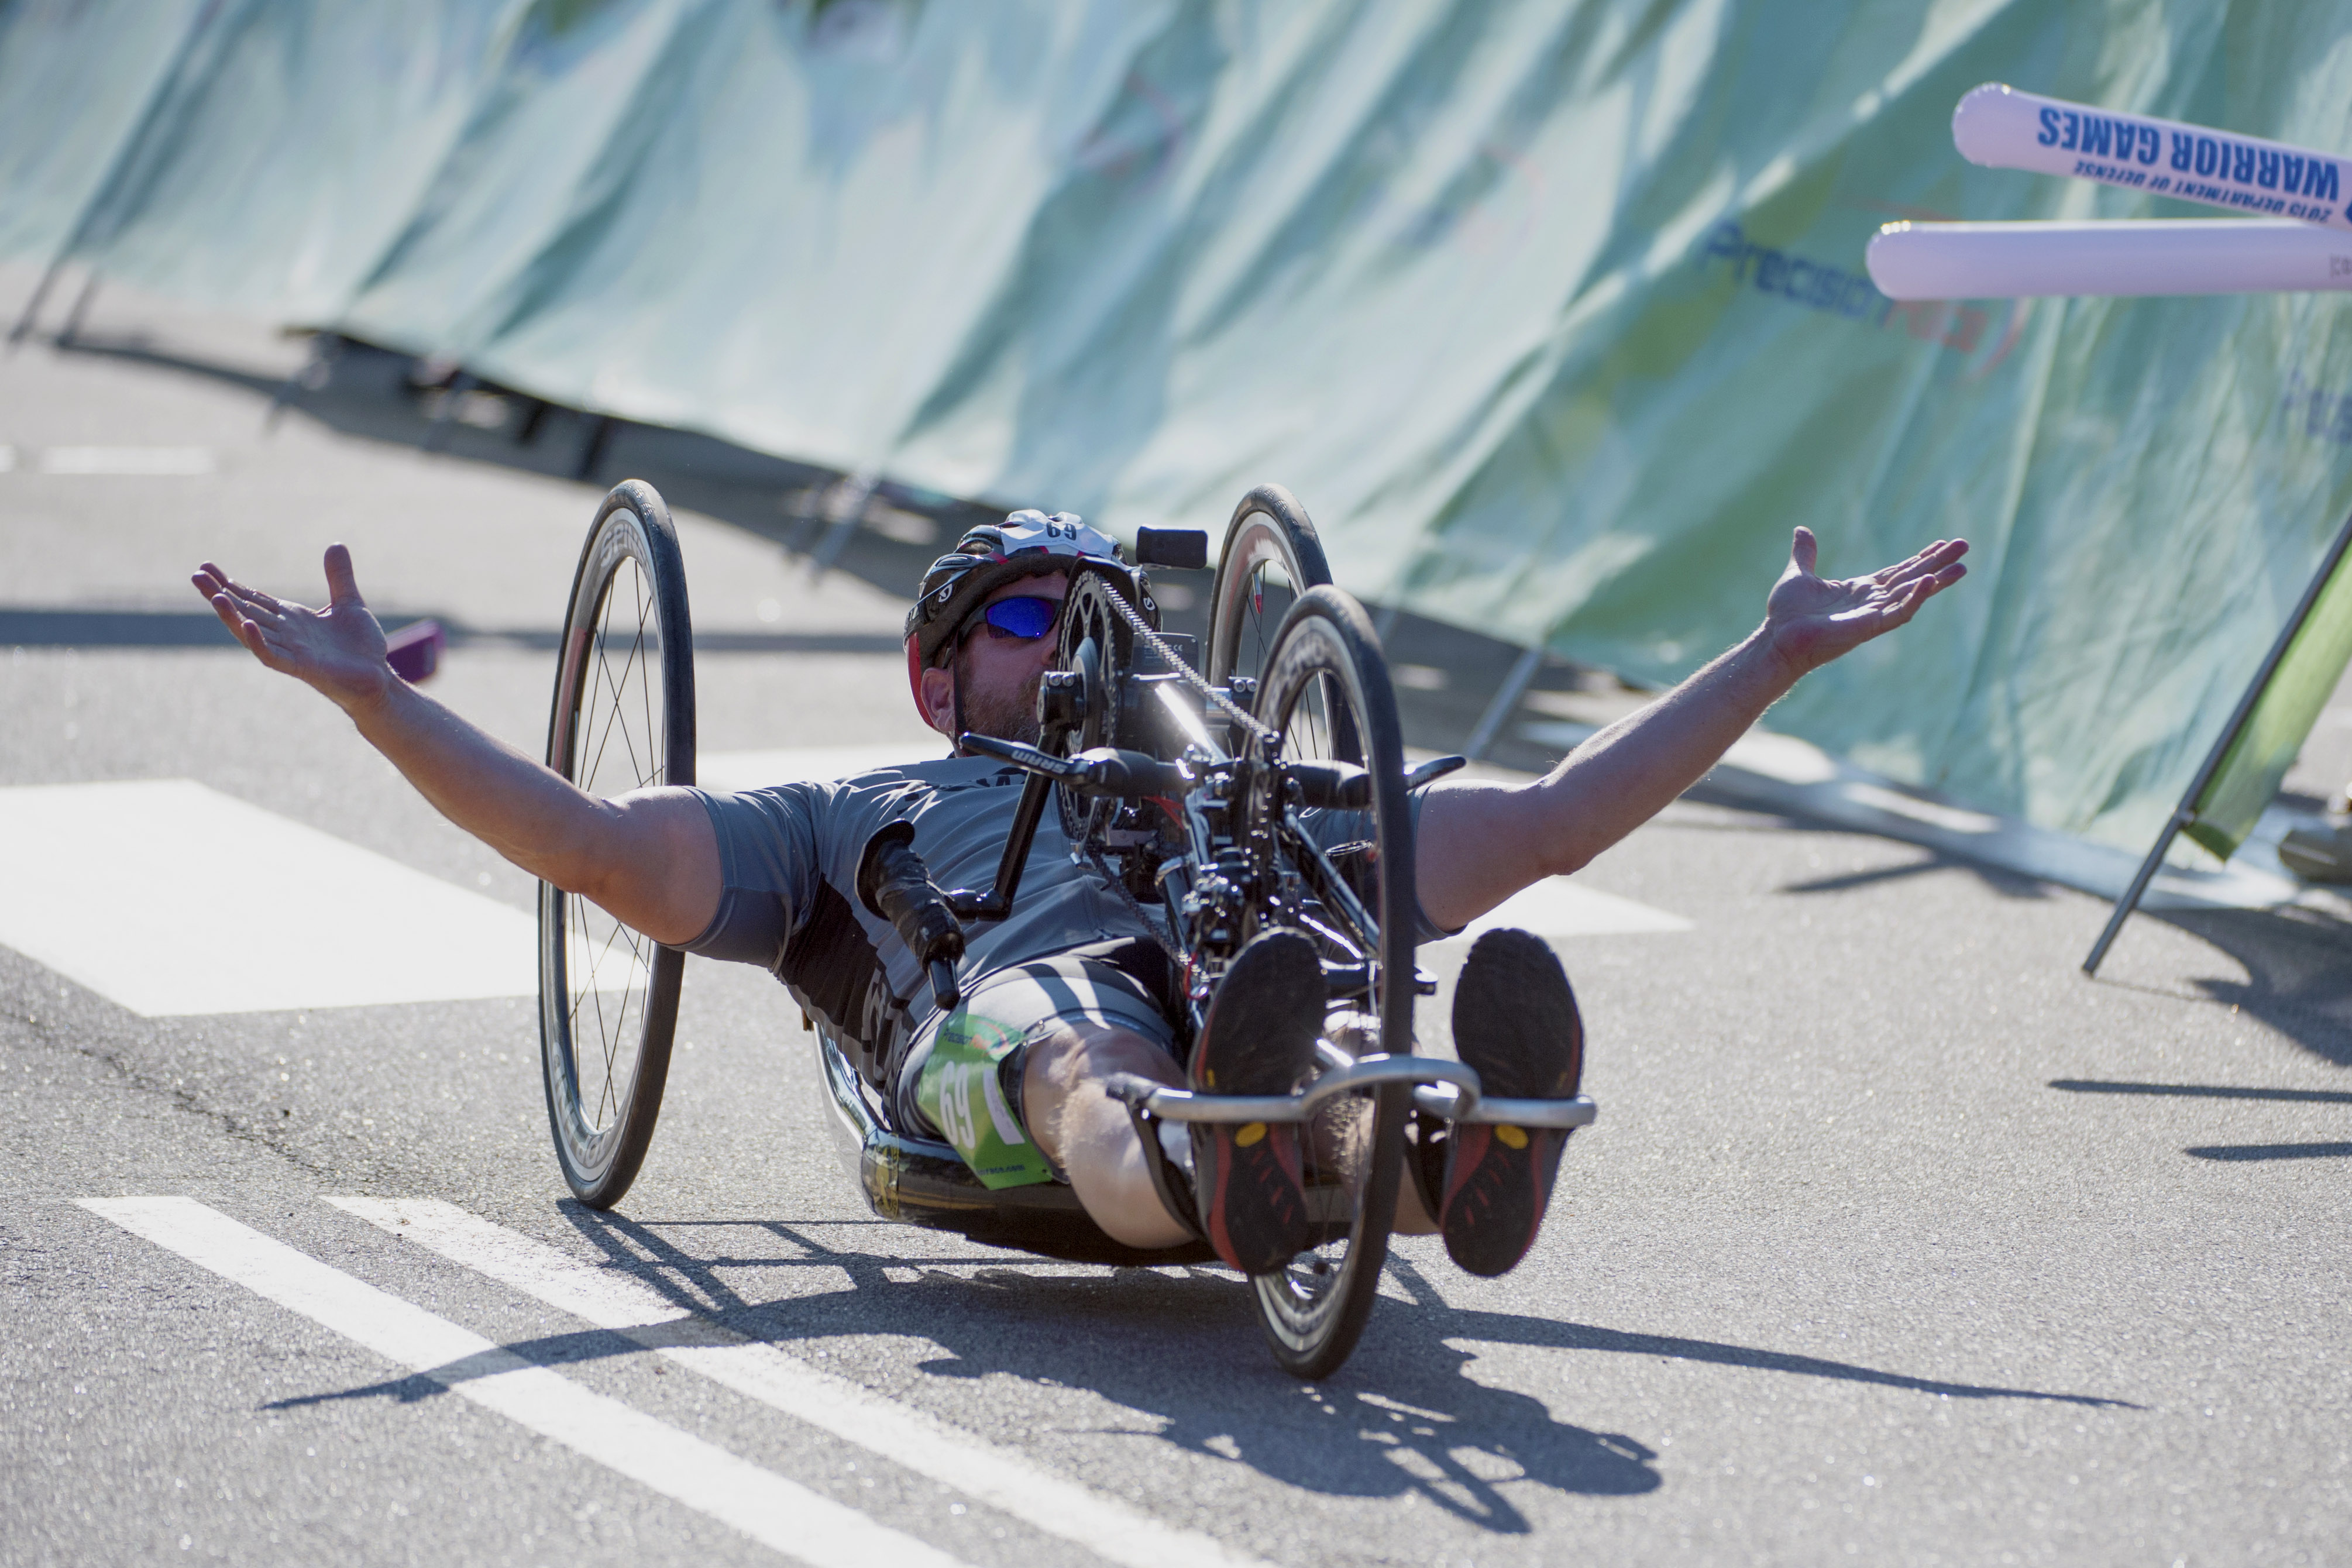 Special Operations Command Team’s David Neumer crosses the finish line for gold in the Men’s Open Hand Cycle Division during the 2015 Department of Defense Warrior Games at Marine Corps Base Quantico June 21, 2015. Jimenez won gold in the Men’s H5 Hand Cycle Division.